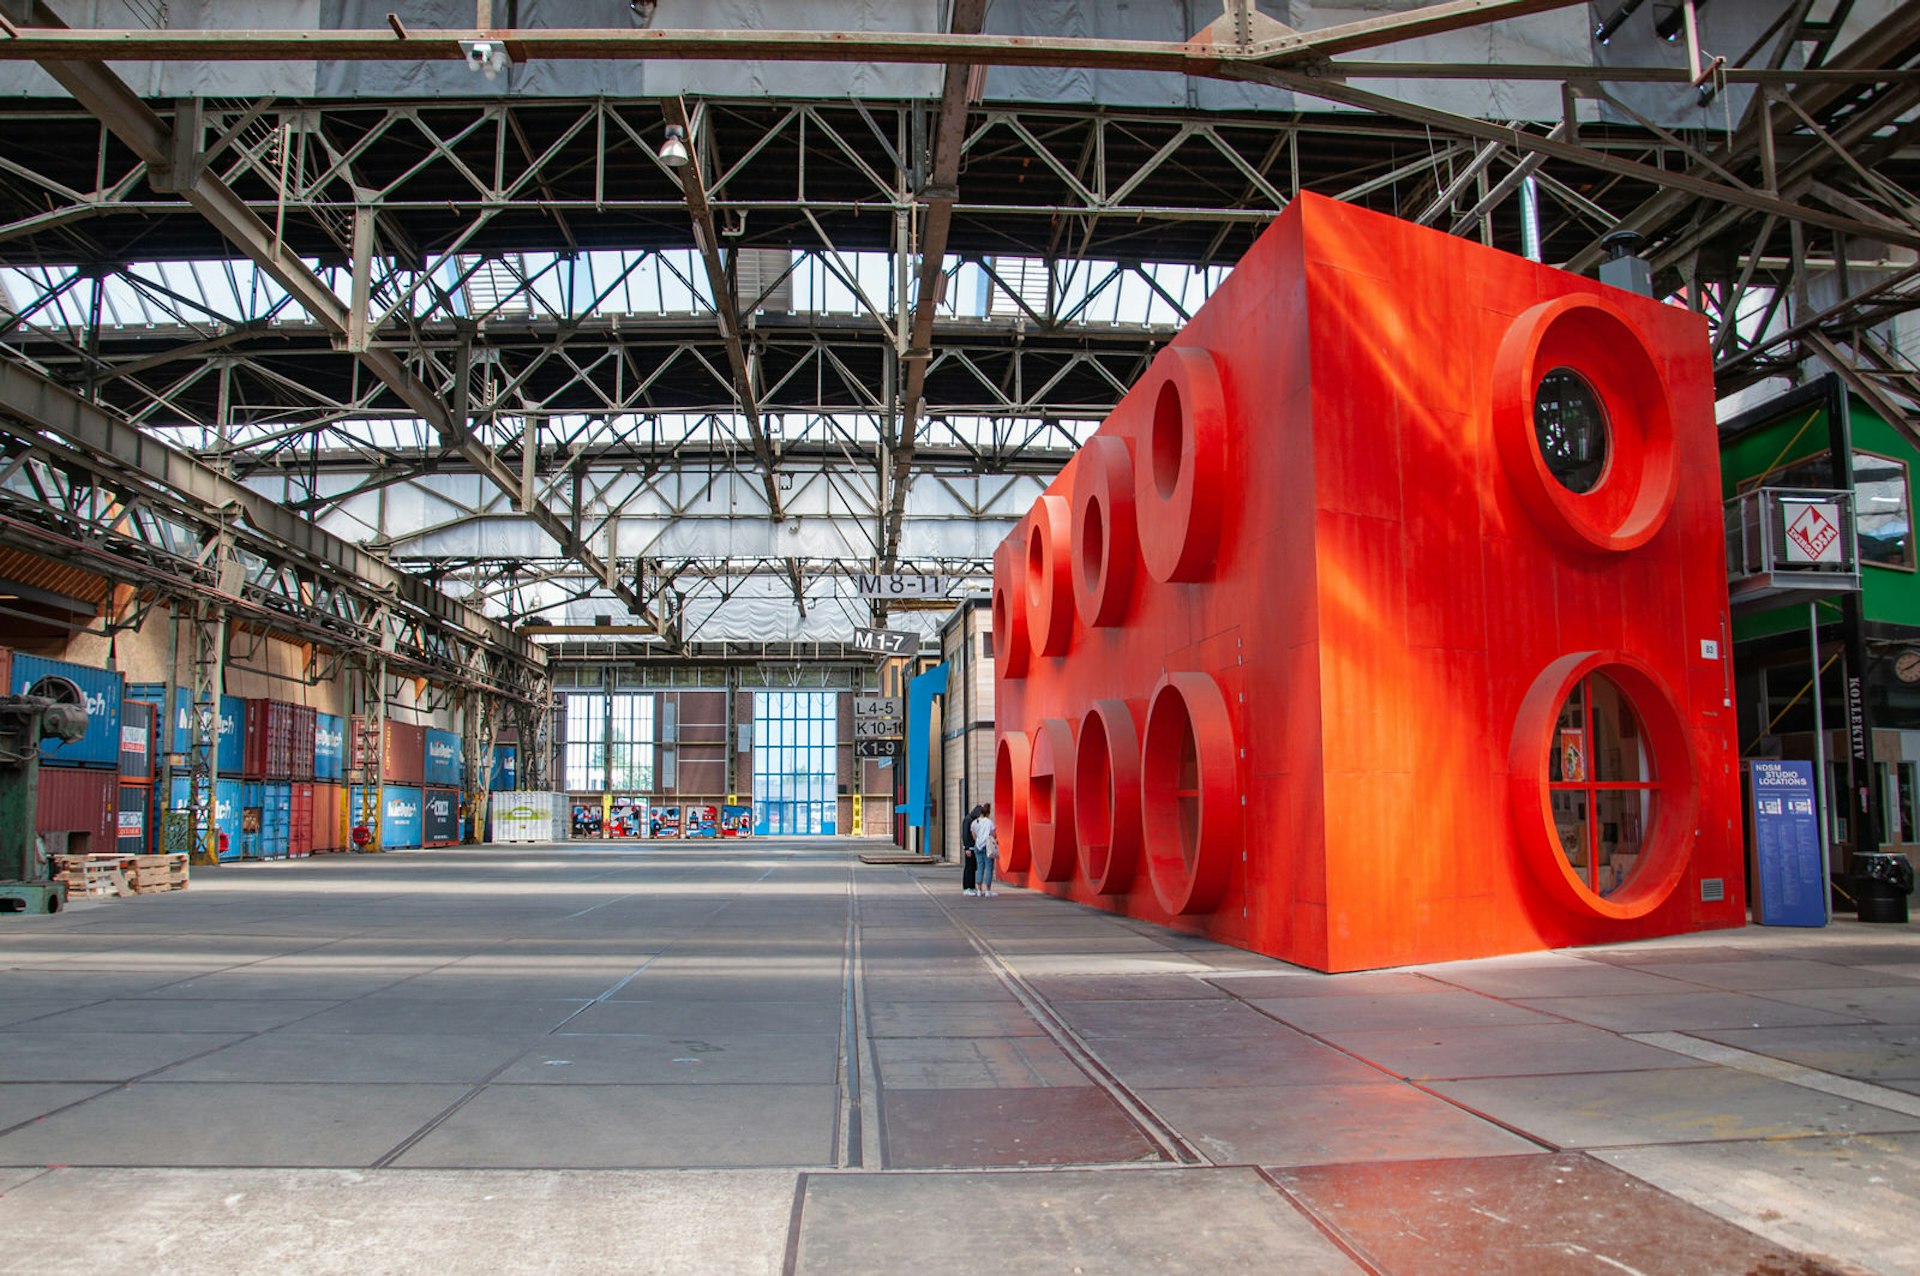 The interior of one of the shipyards at Amsterdam's NDSM-werf. where a giant red Lego brick is on display amongst the shipping containers